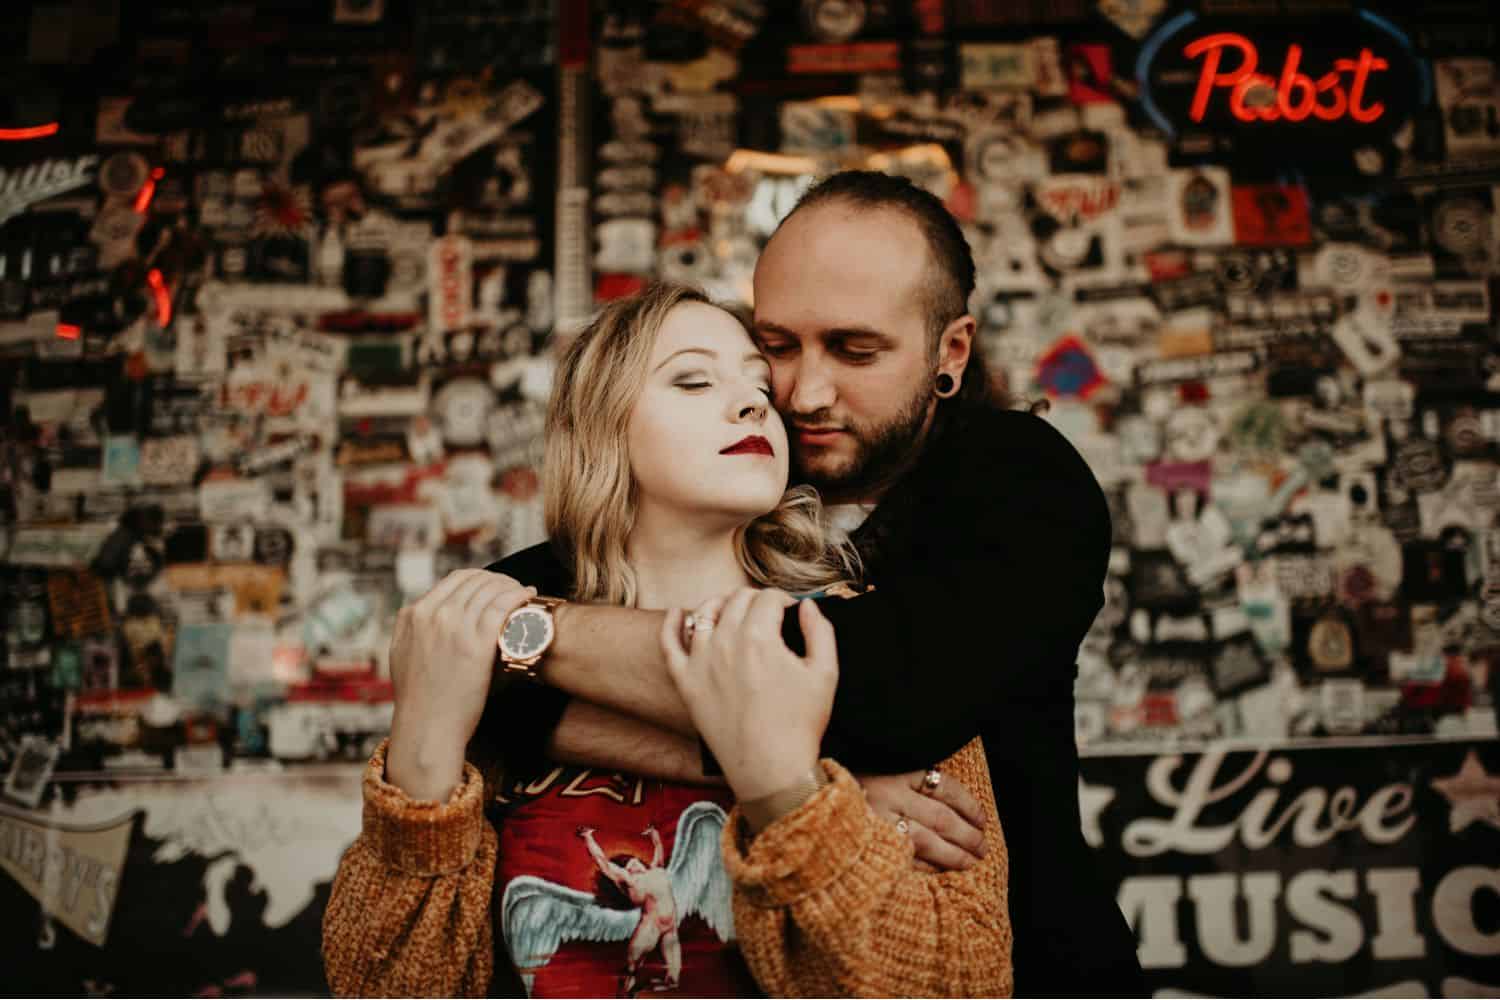 A hipster couple embraces in a bar in front of a wall full of band stickers. Learn how to take low light photos like this one from Shelby Laine Photography